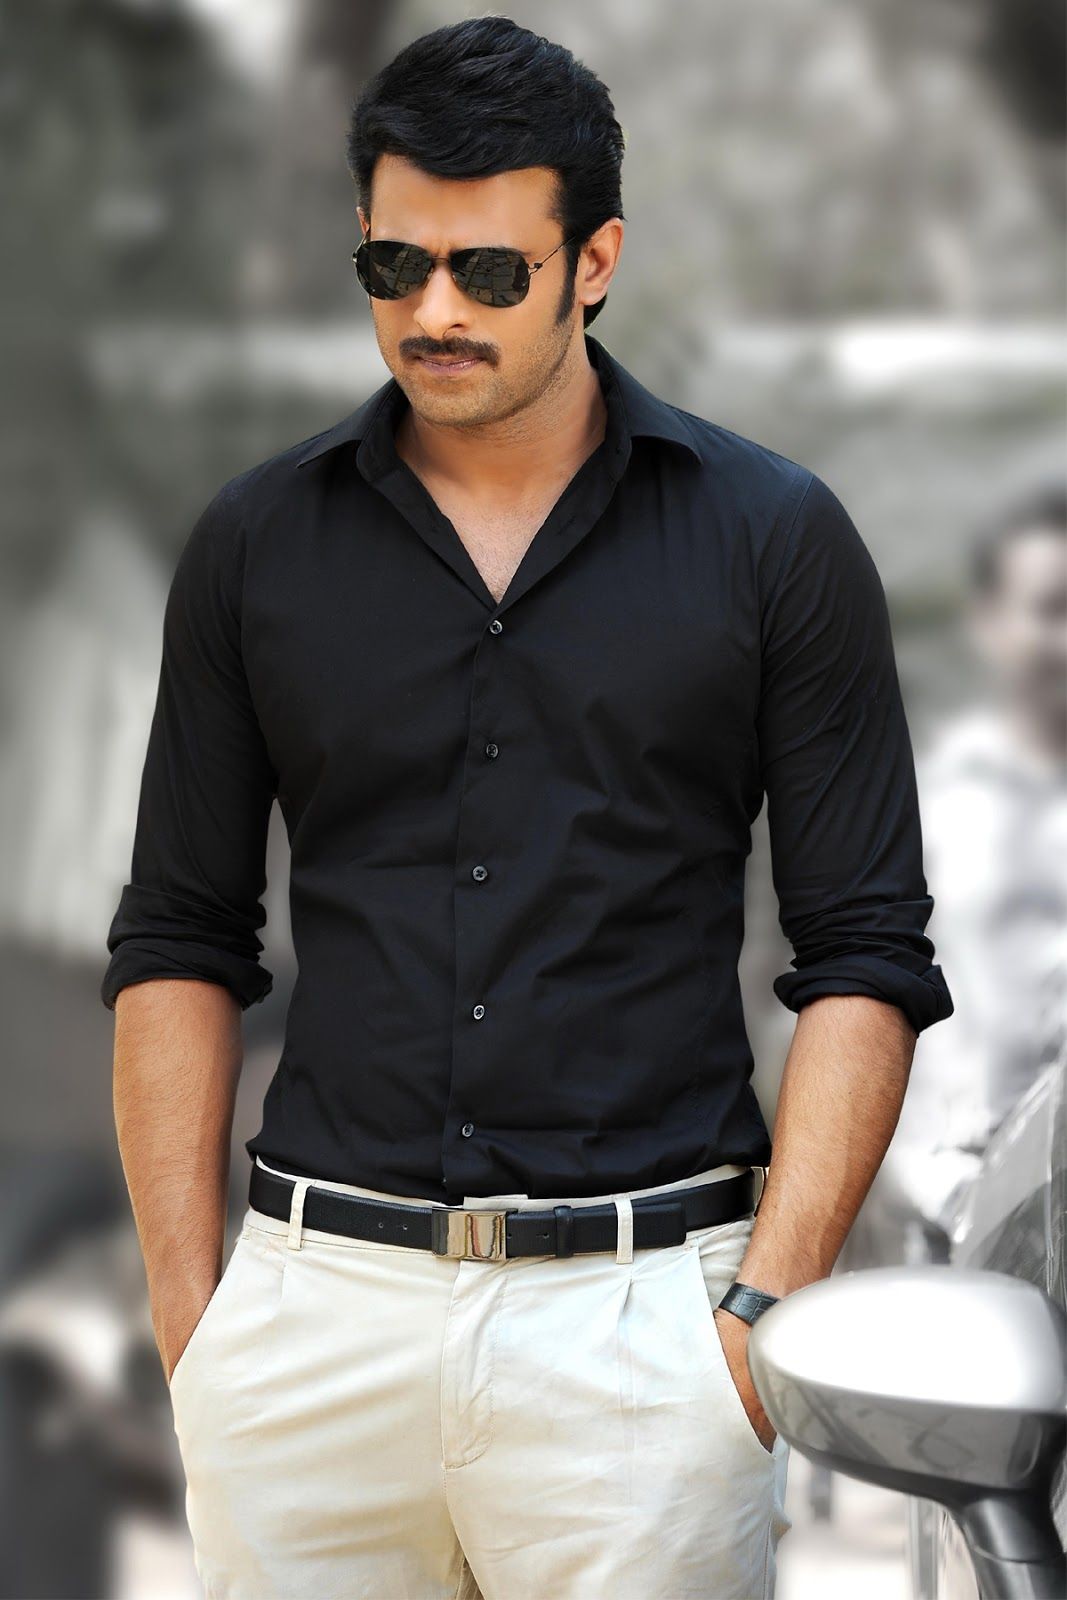 Impressive Collection of 999+ Prabhas Images Free for Download – Full 4K